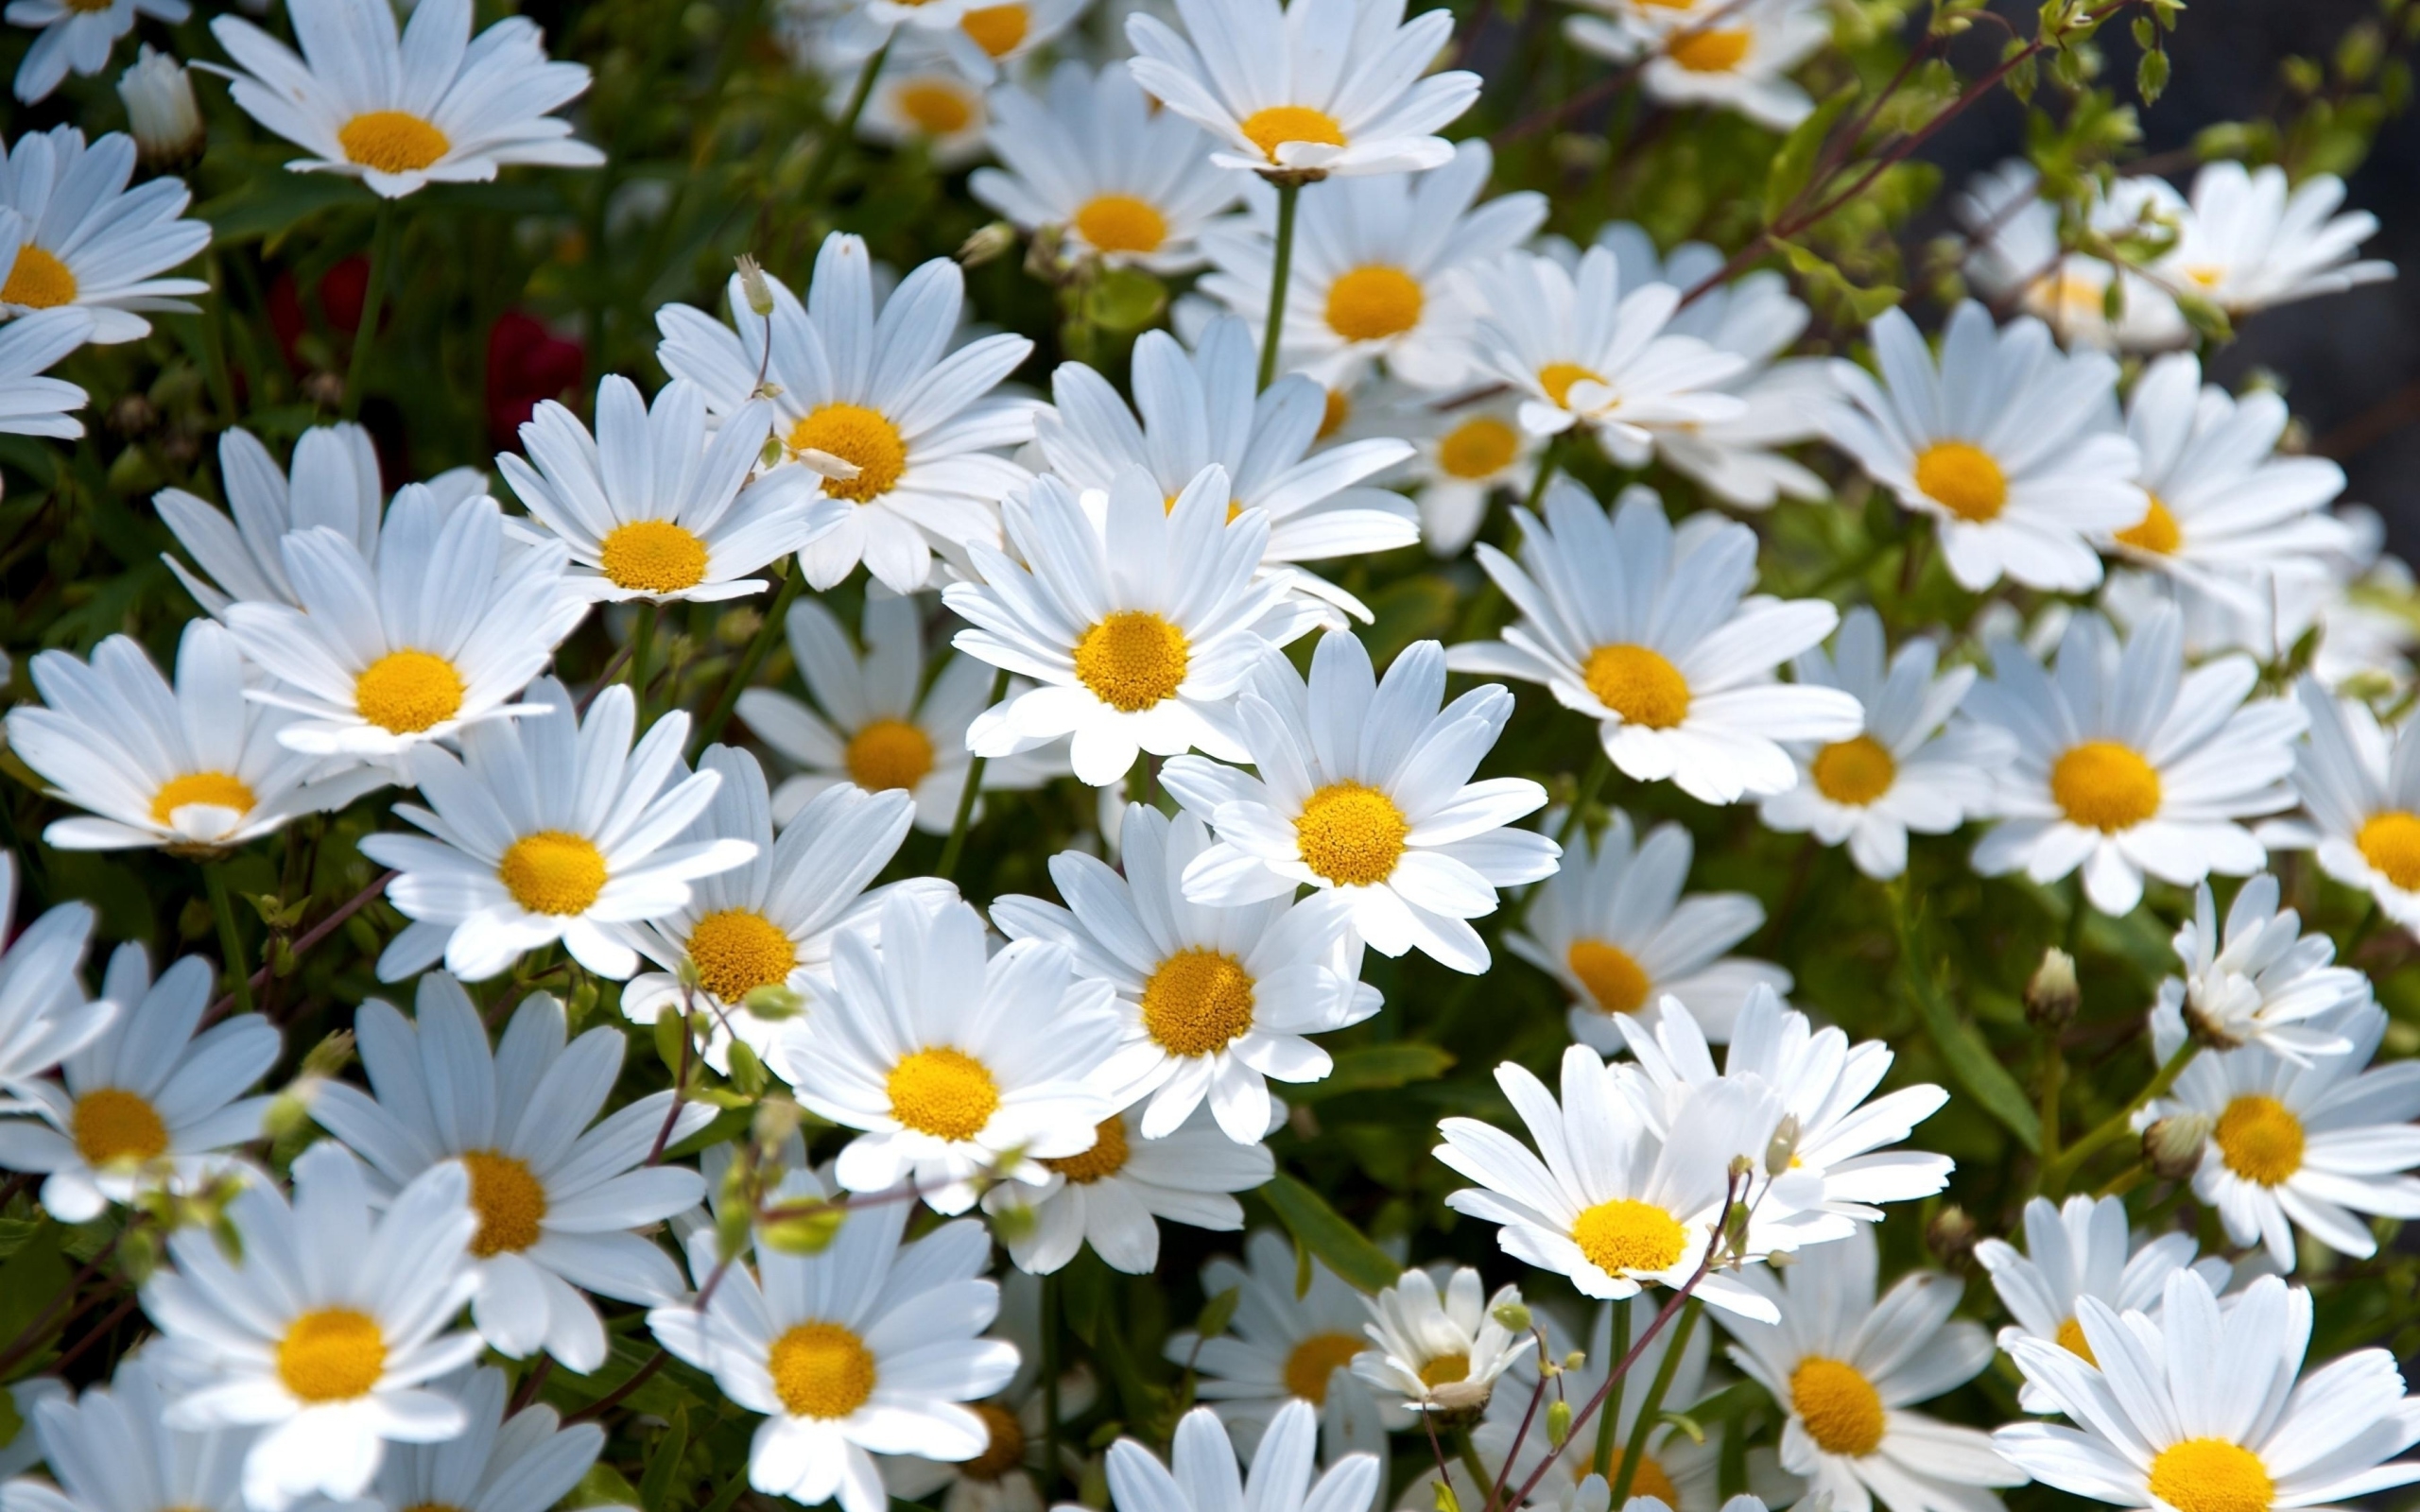 Daisy images free